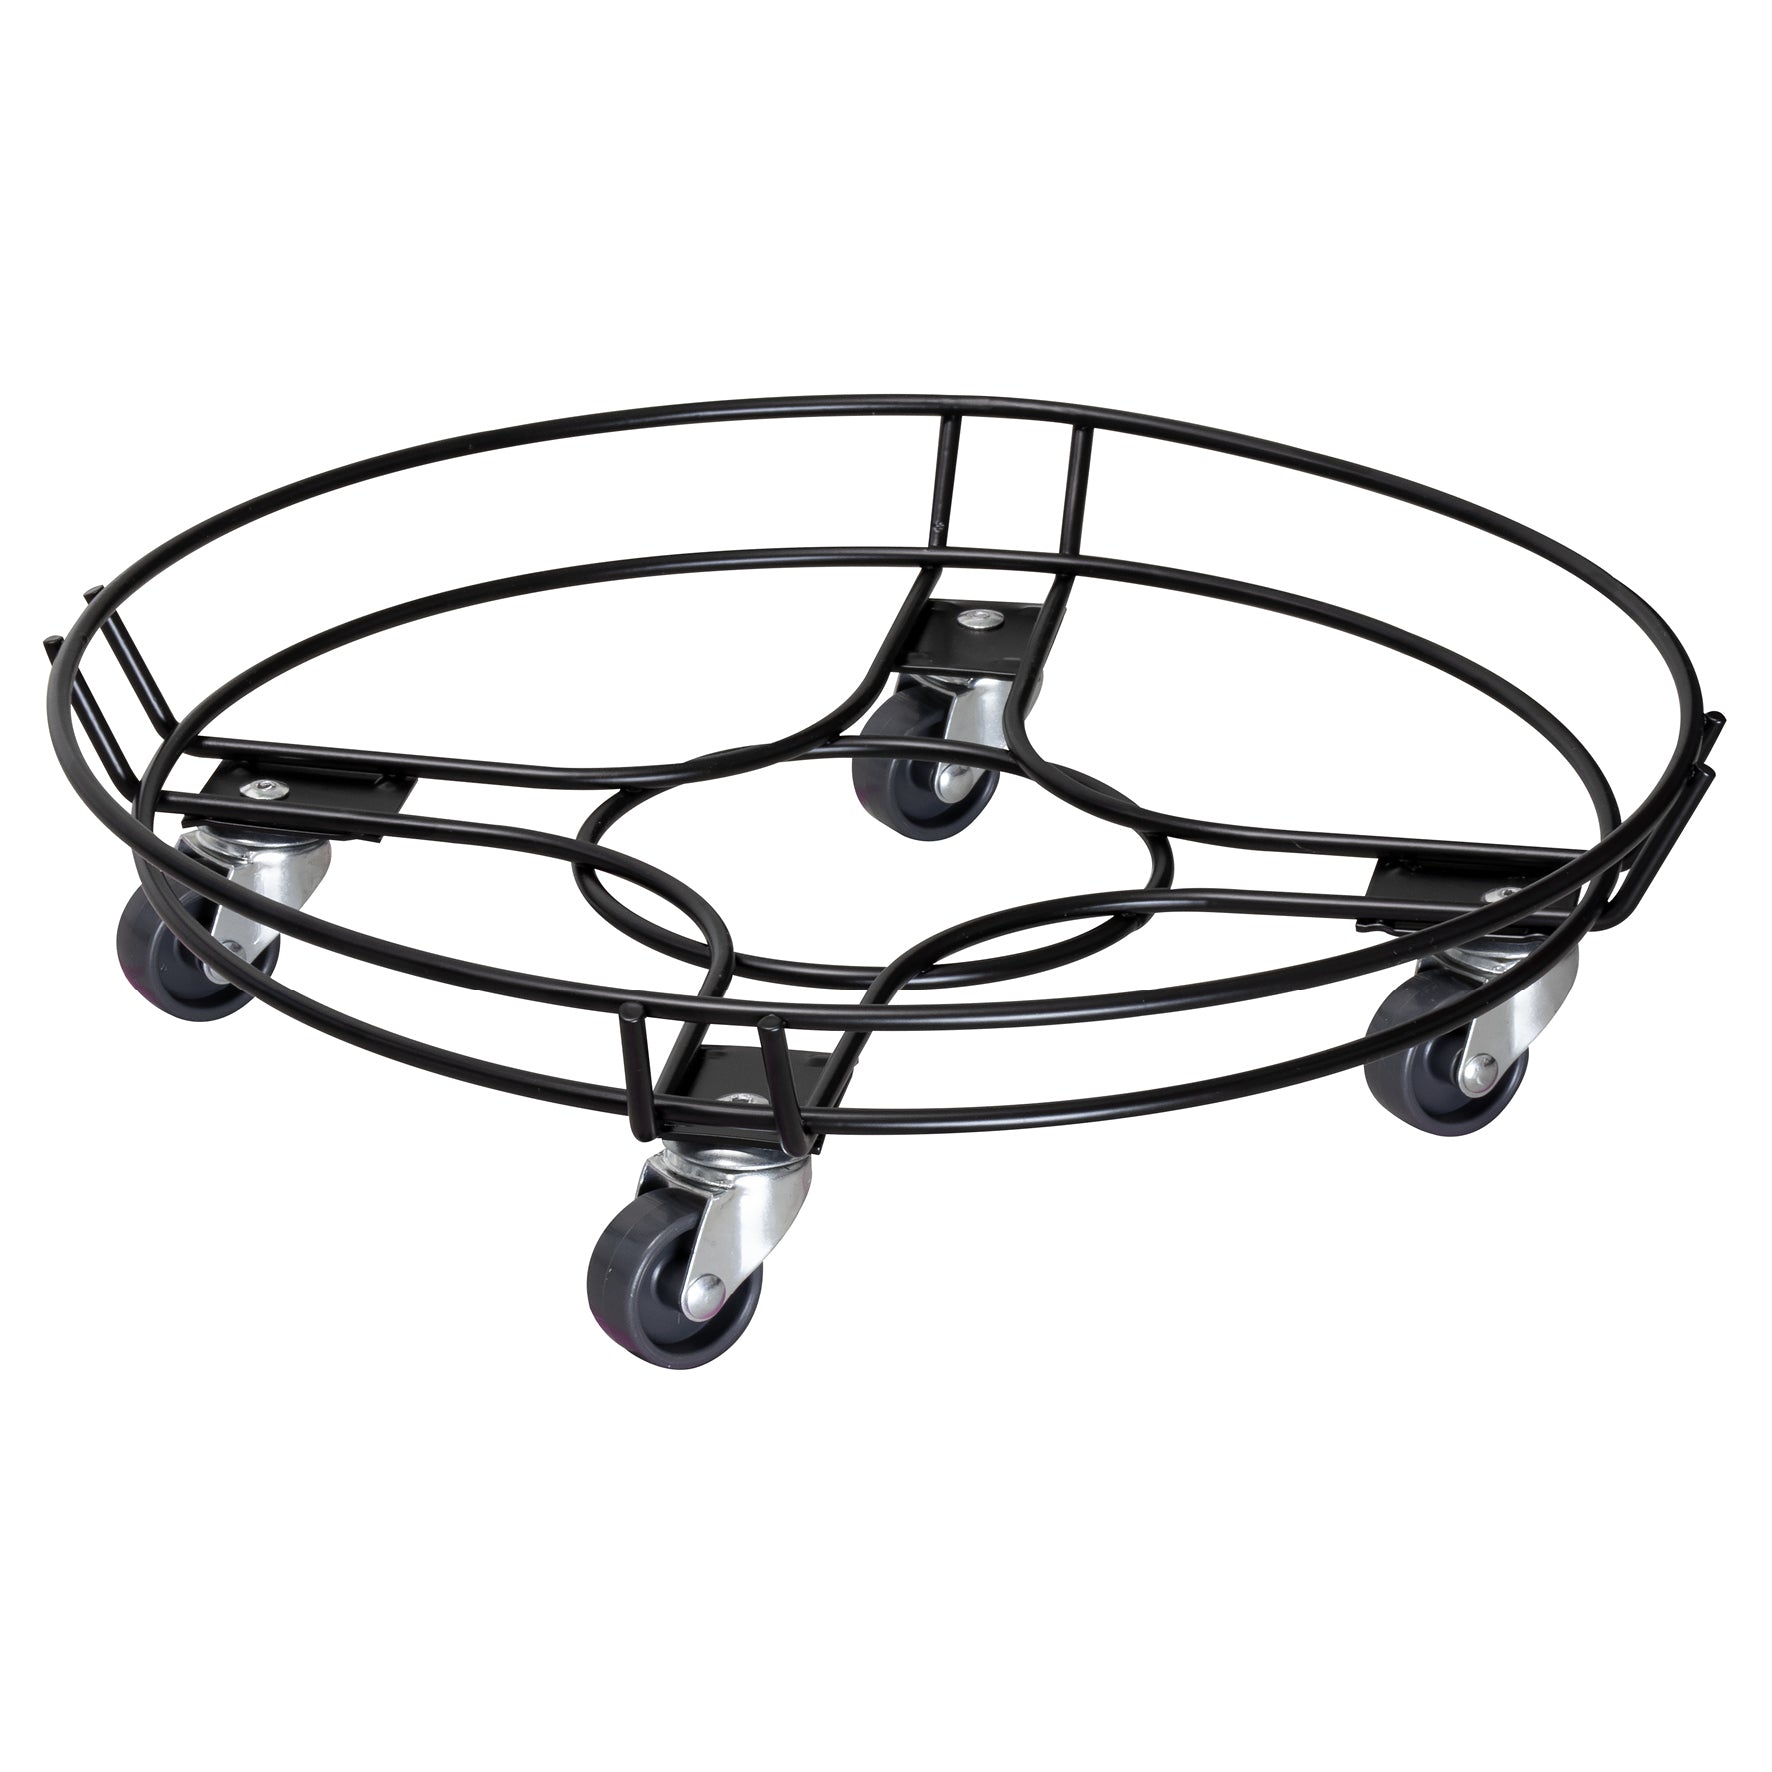 Black Round Steel Wire Plant Caddy. 220 lbs capacity. 15"D x 3.75"H, 2.2 lbs.